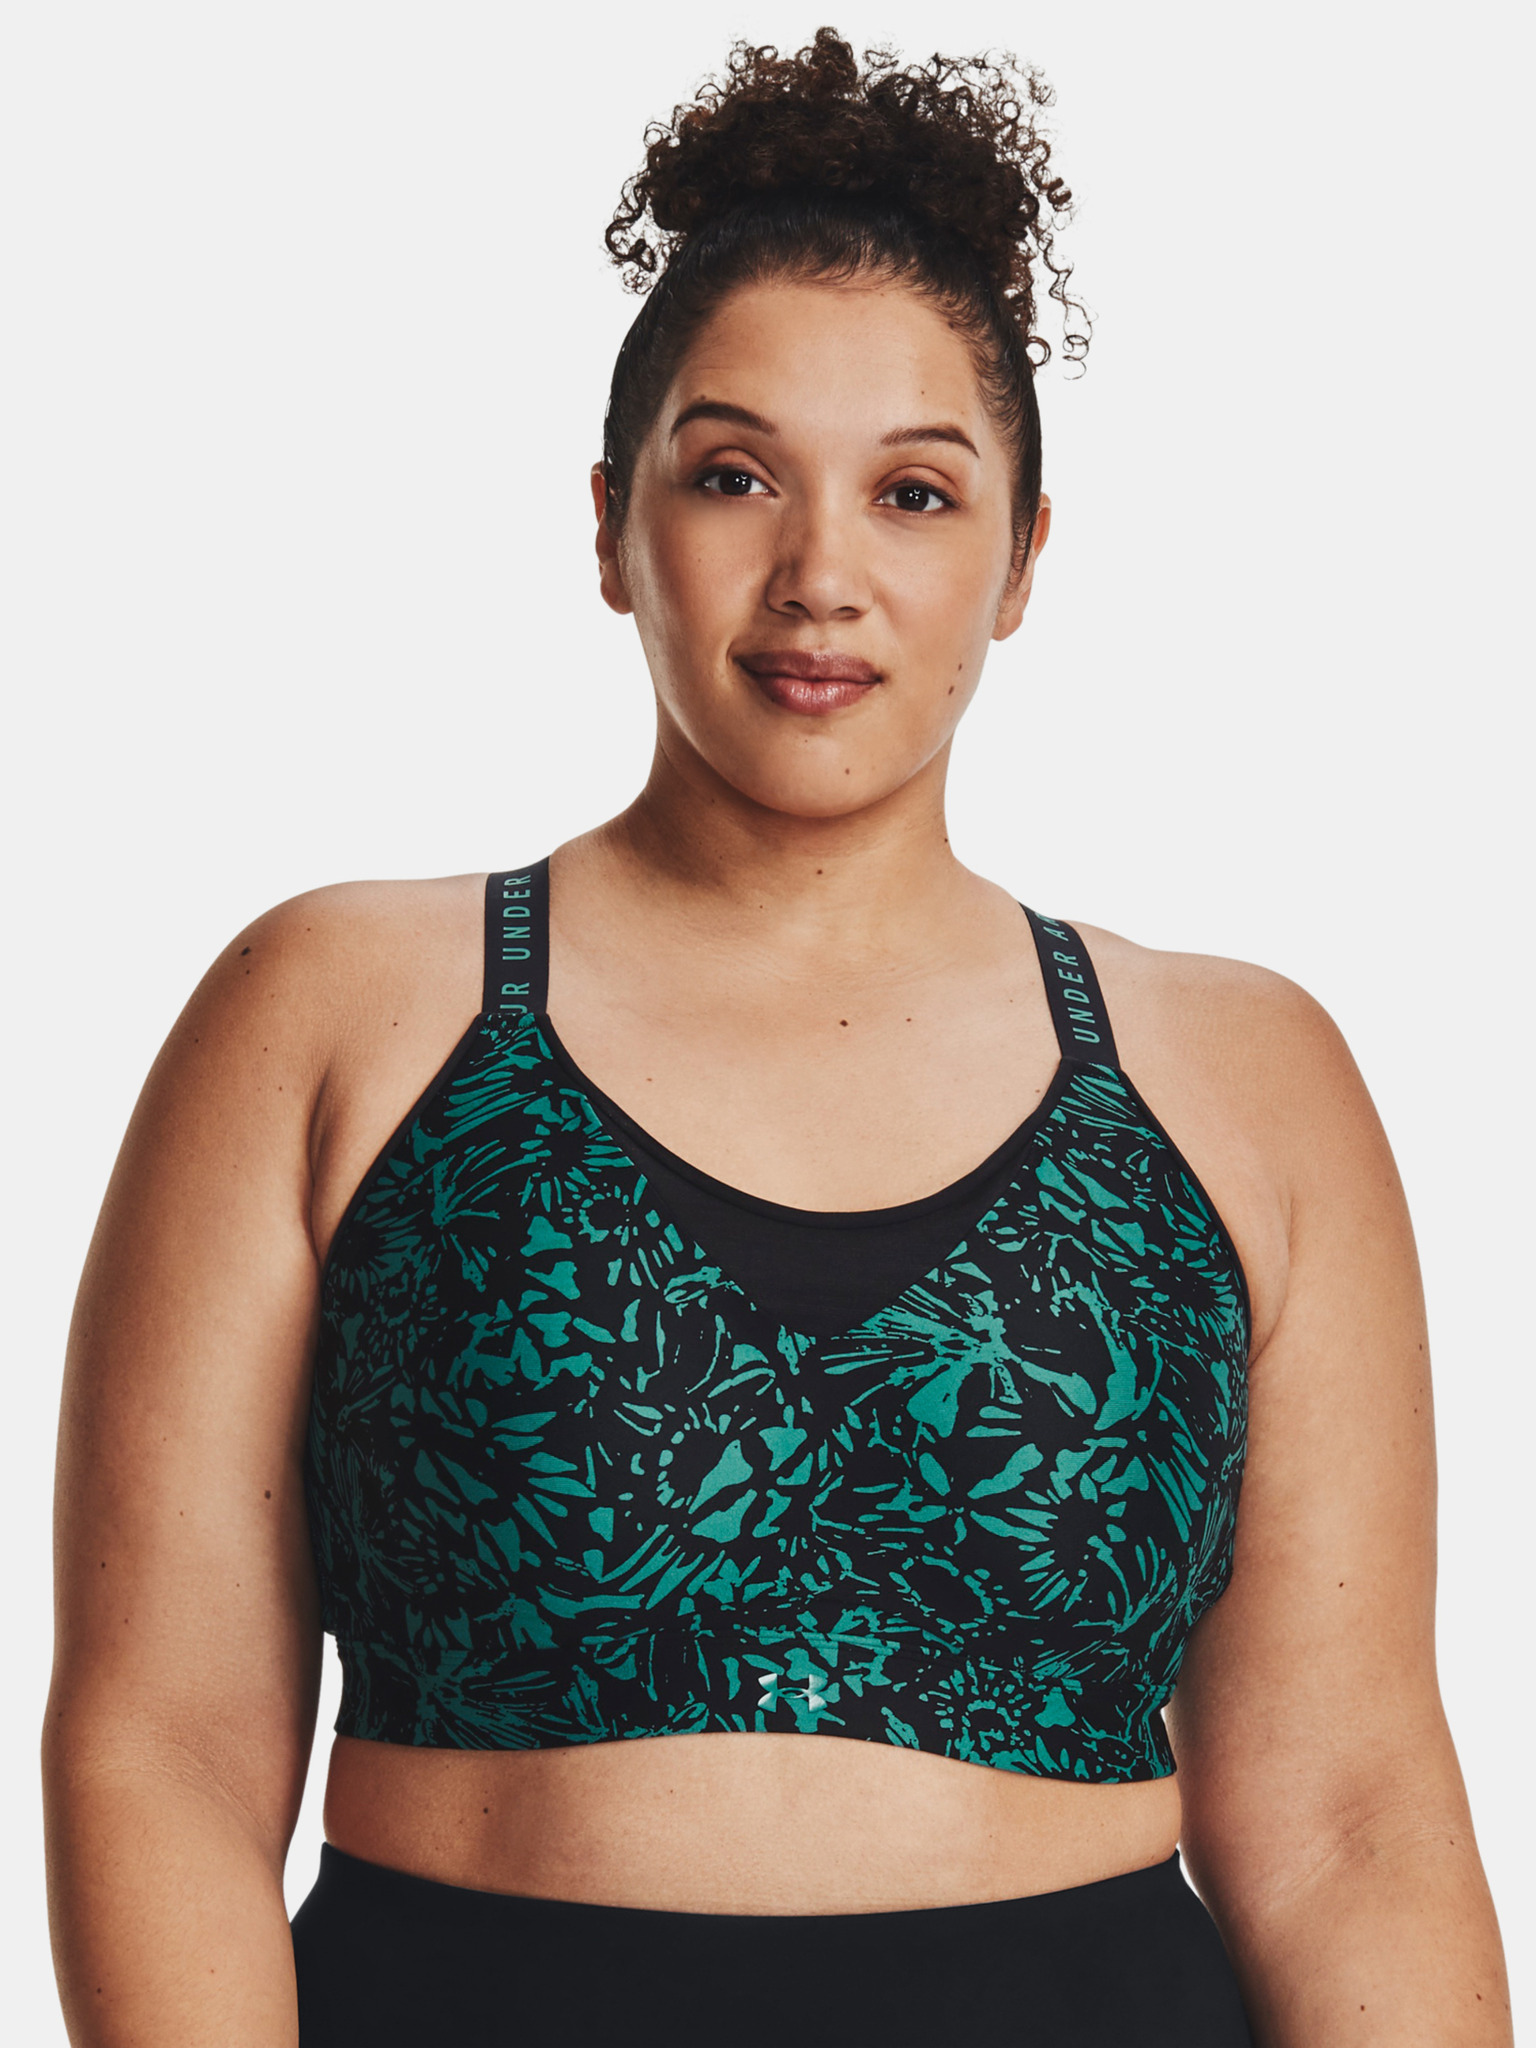 Under Armour Infinity Womens High Printed Sports Bra in Black